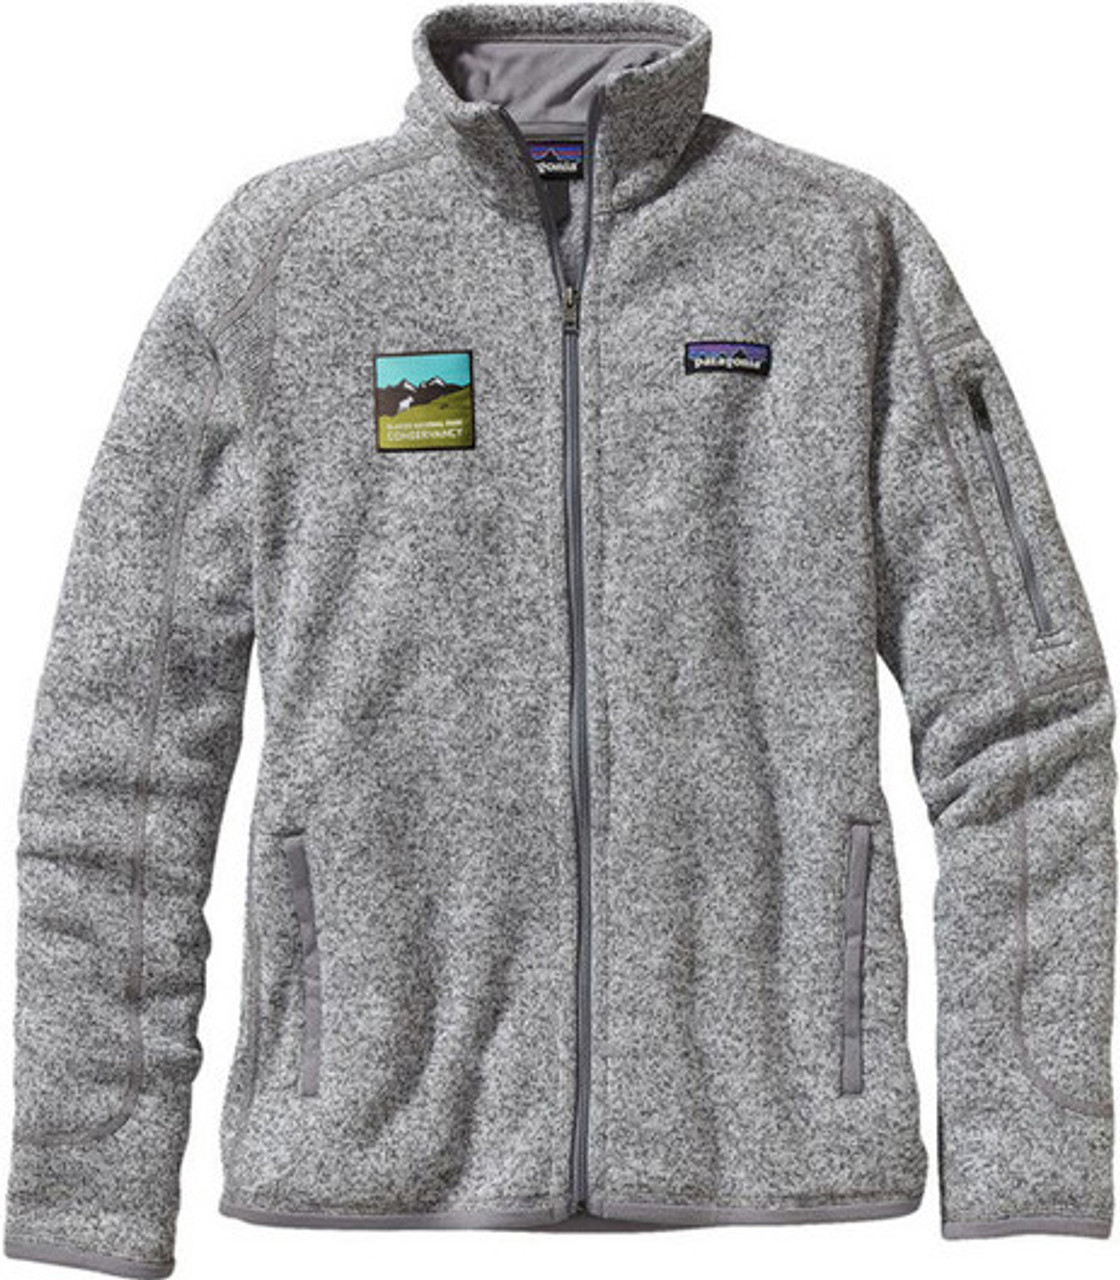 Patagonia, Jackets & Coats, Womens Patagonia Fleece Pullover Size Small  Purple And White Is The Color